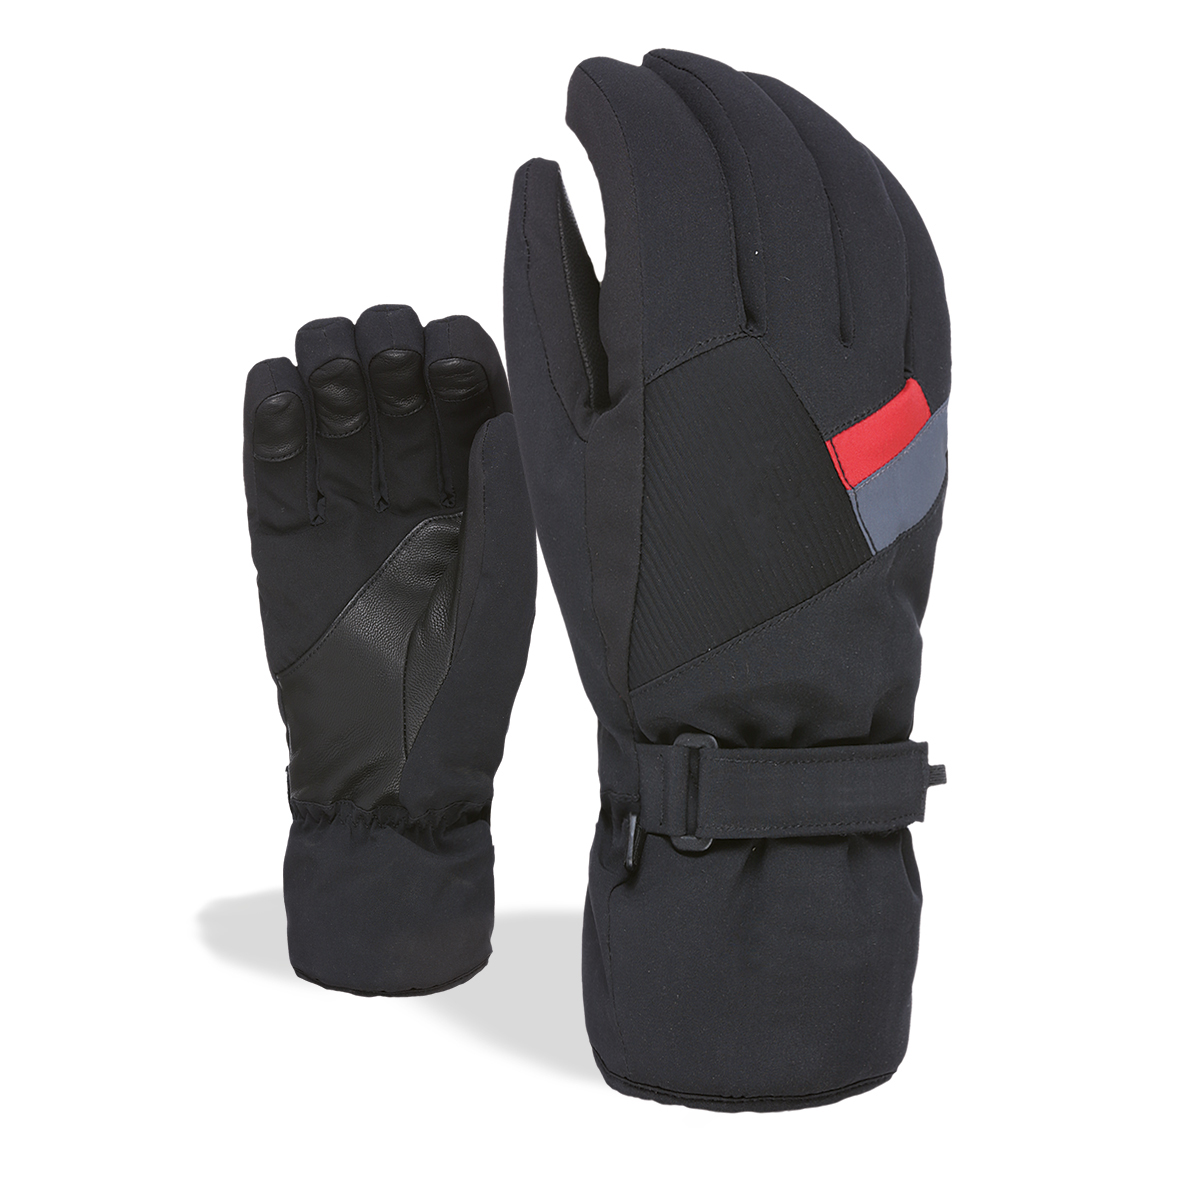 New good price water&windproof warm leather palm touchscreen winter ski gloves